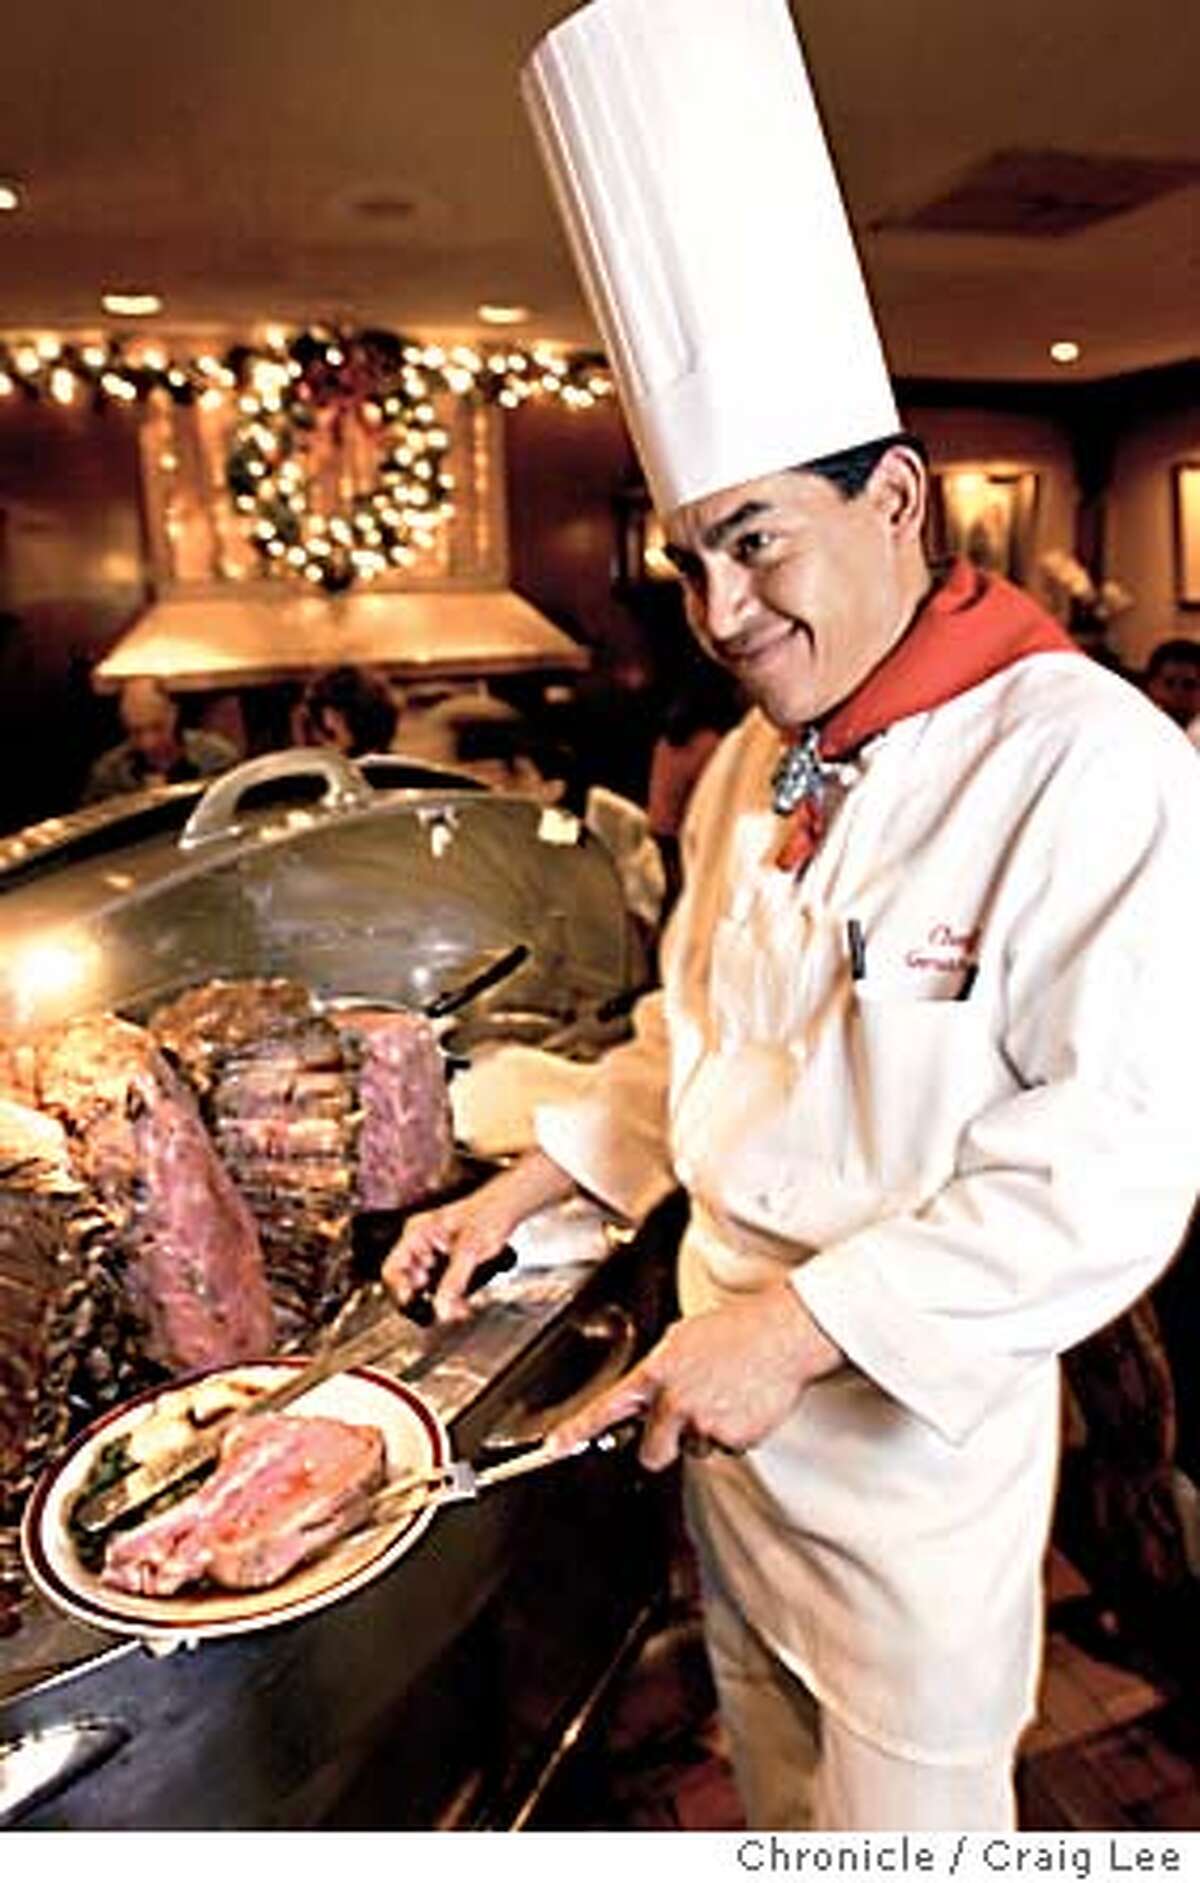 Story about how to cook prime rib. Photo of chef Gerardo Ramirez at the House of Prime Rib restaurant in San Francisco on Van Ness Avenue, carving up a piece of prime rib. Event on 12/8/03 in San Francisco. CRAIG LEE / The Chronicle